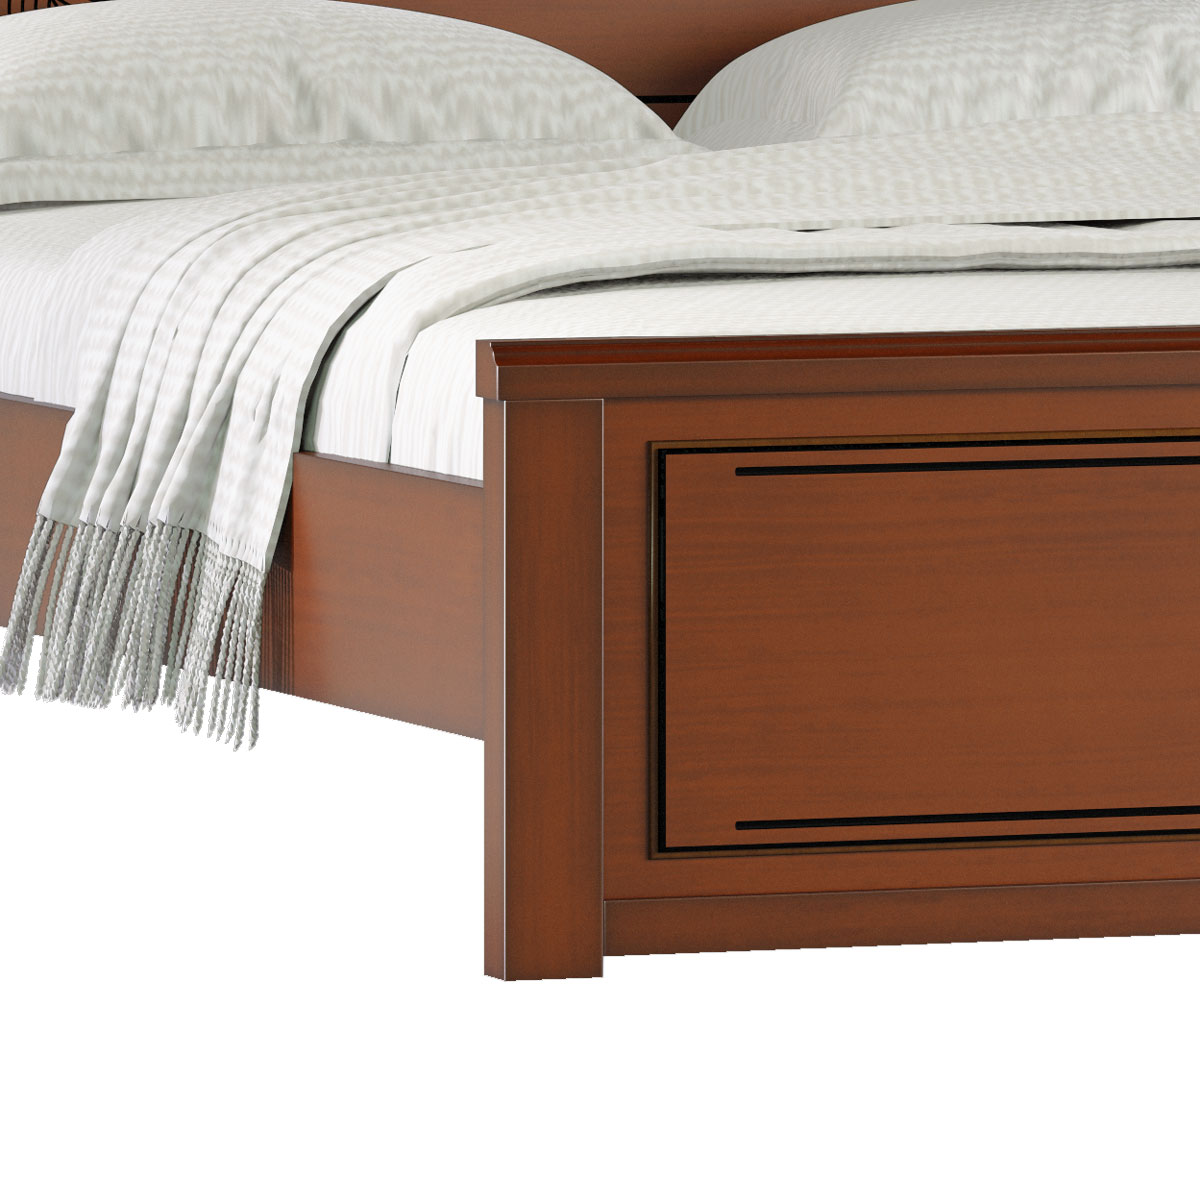 Wooden double bed I BDH-367-3-1-20